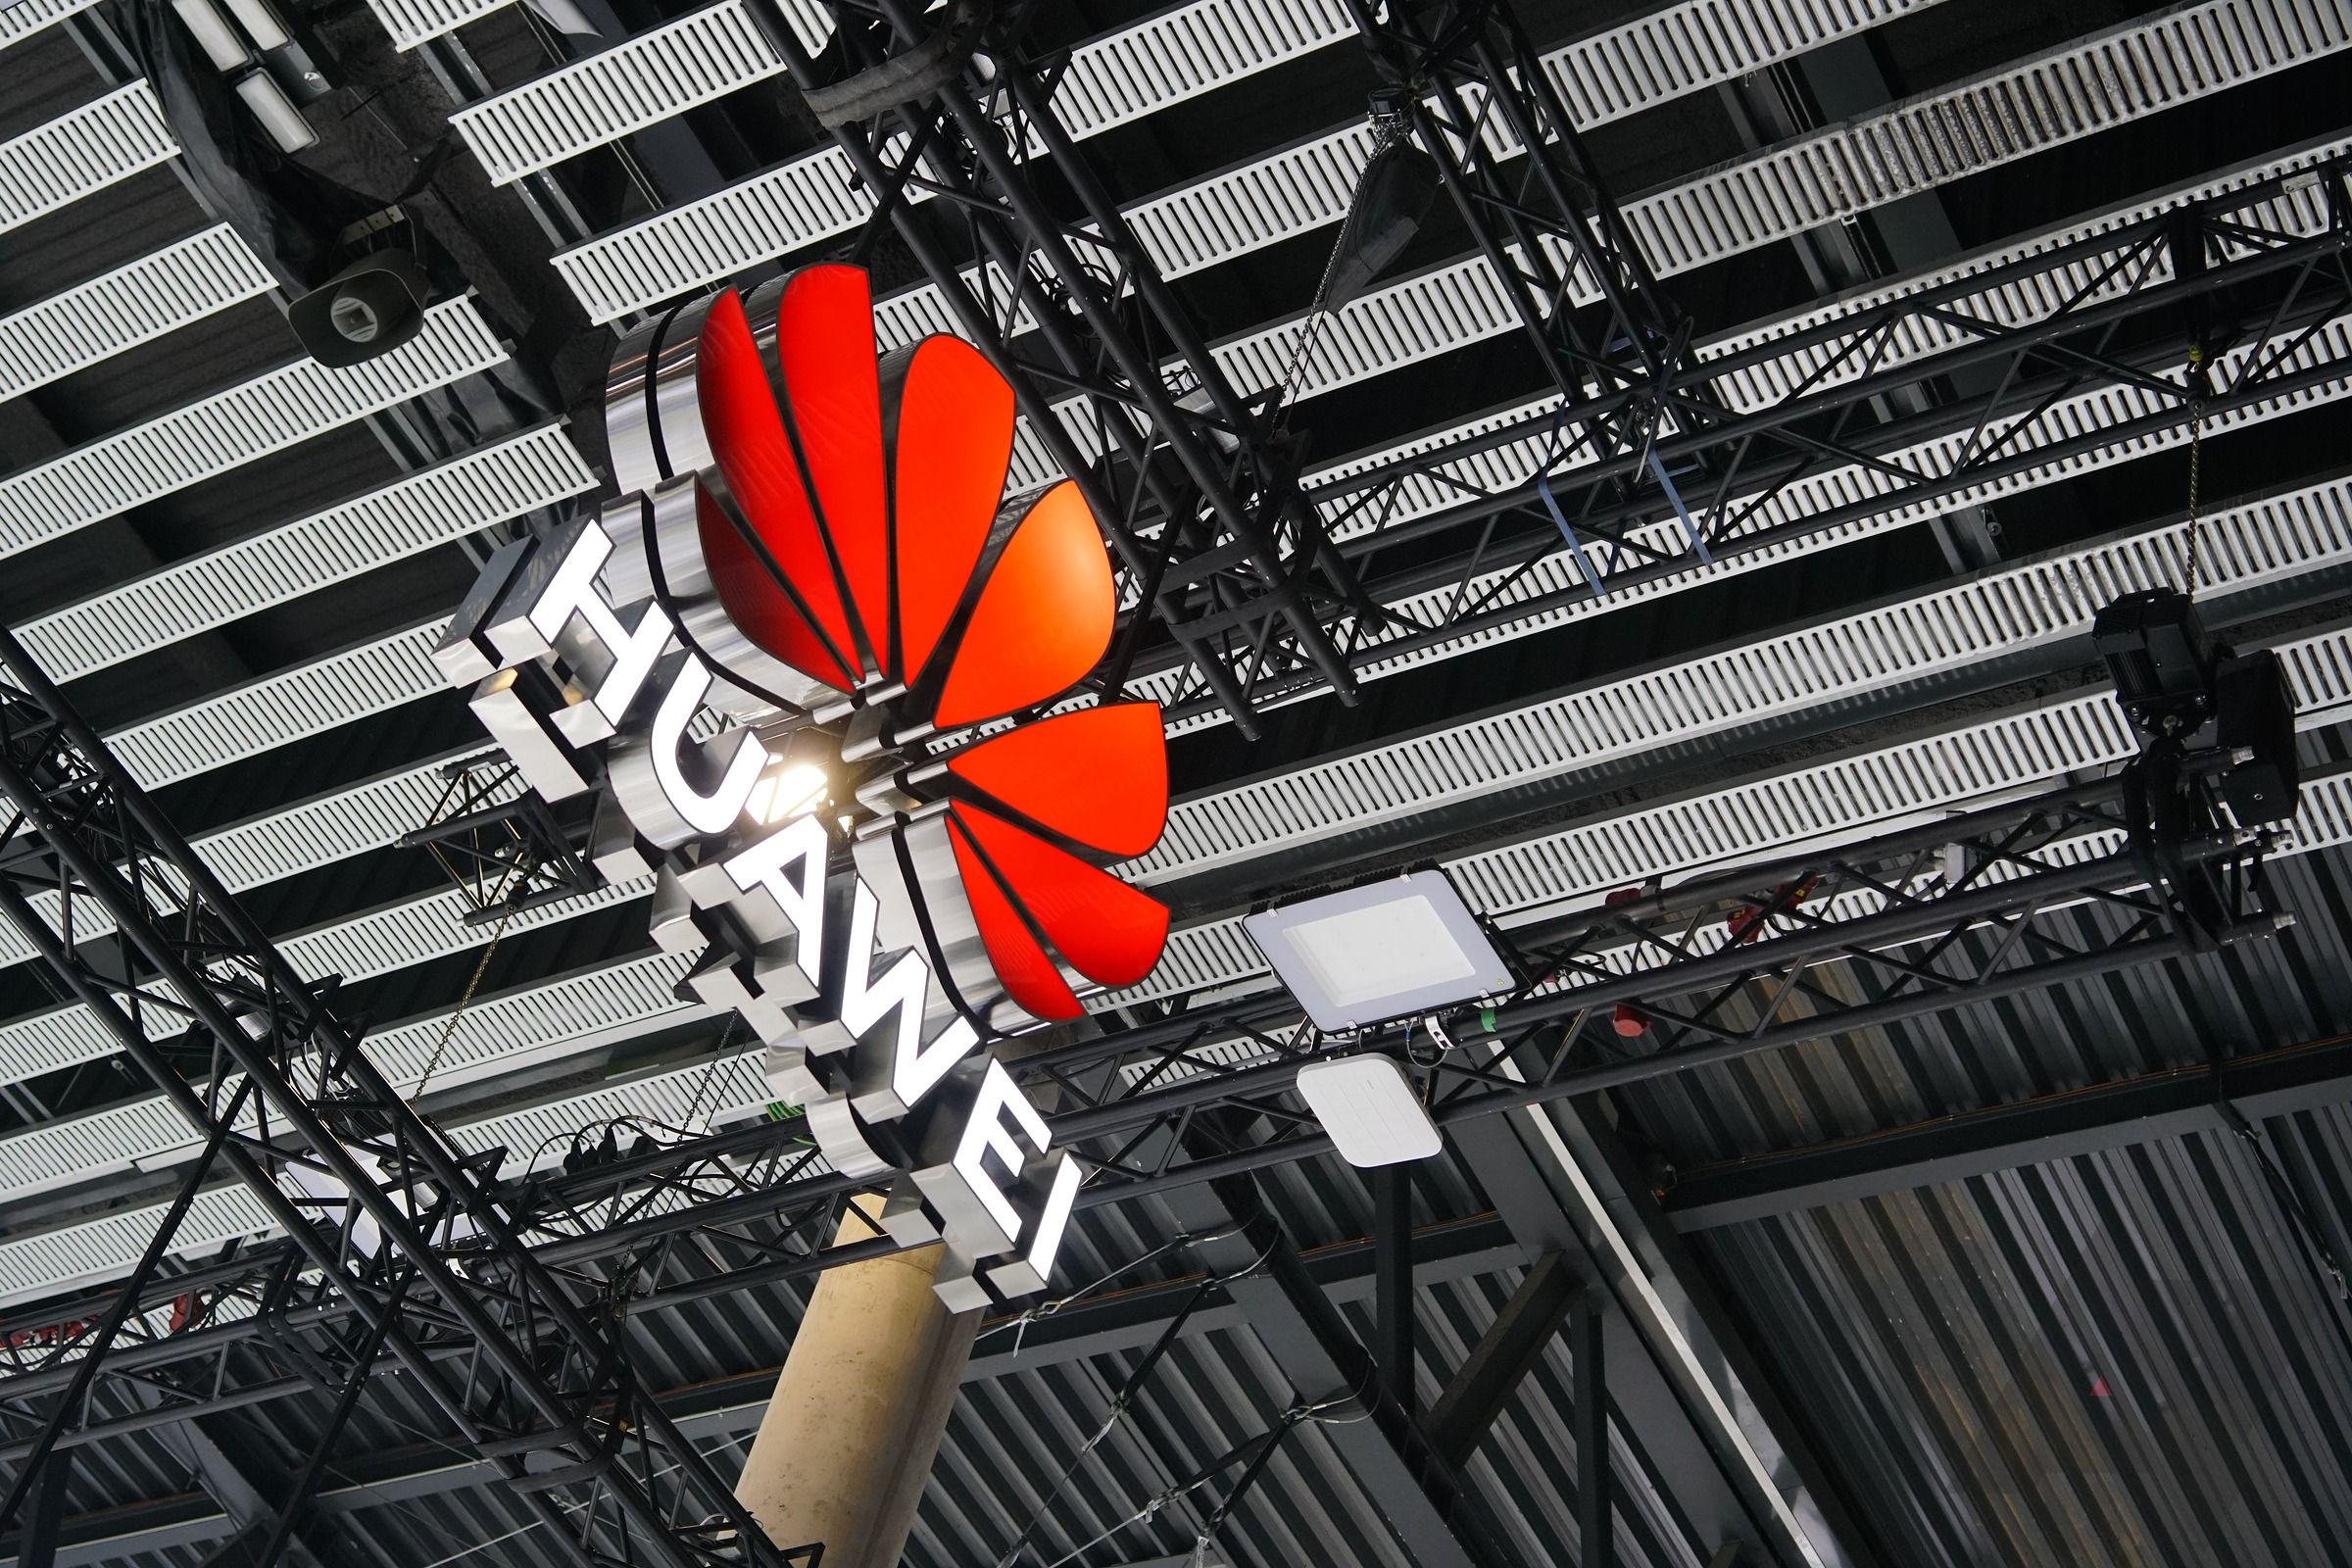 There's actually some good news for Huawei coming out of the US